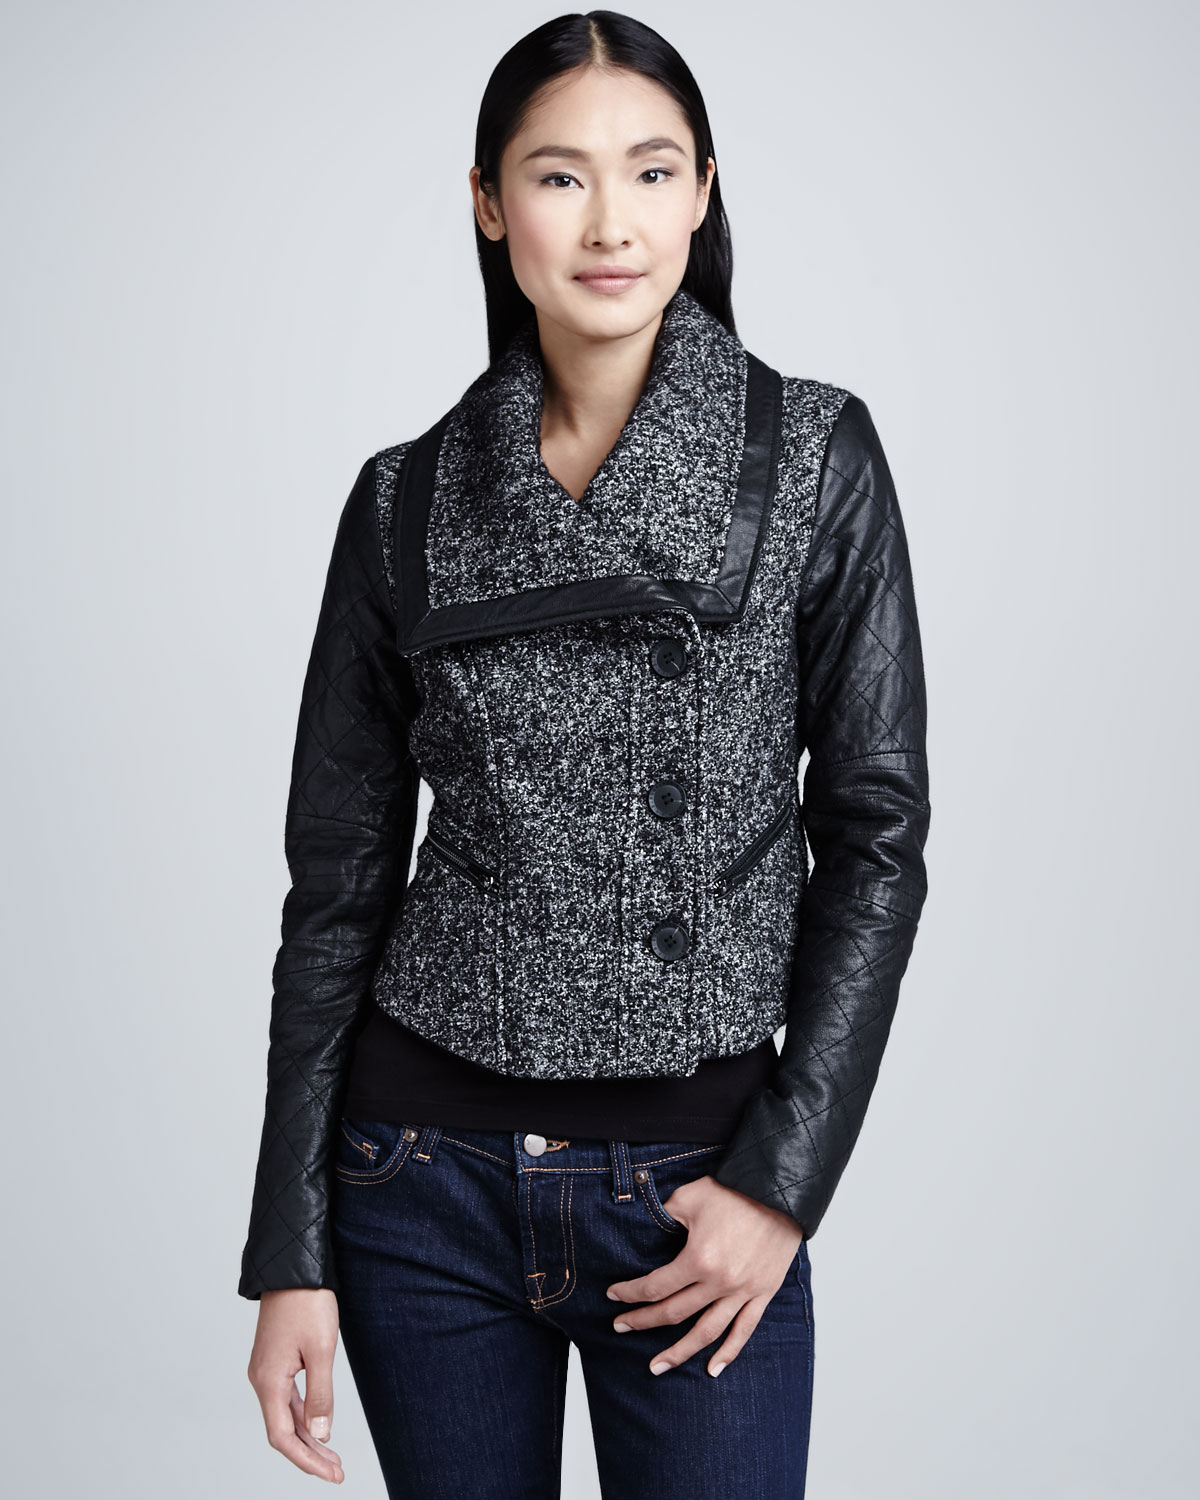 Lyst - Bcbgmaxazria Tweed Jacket with Leather Sleeves in Black